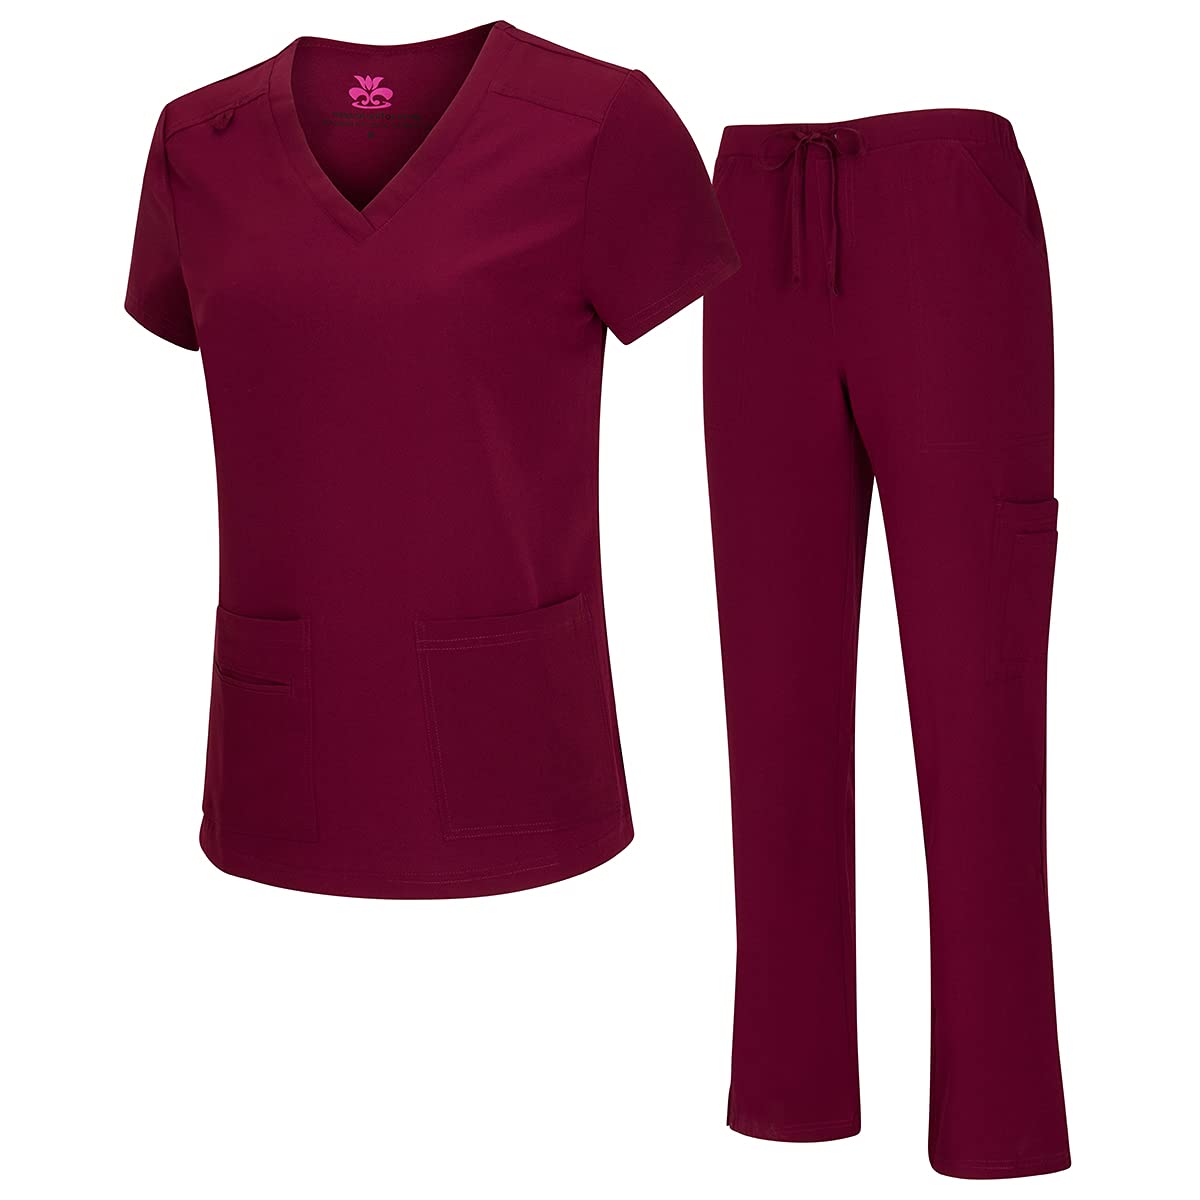 Natural Uniforms Womens cool Stretch V-Neck Top and cargo Pant Set (Burgundy, X-Small)